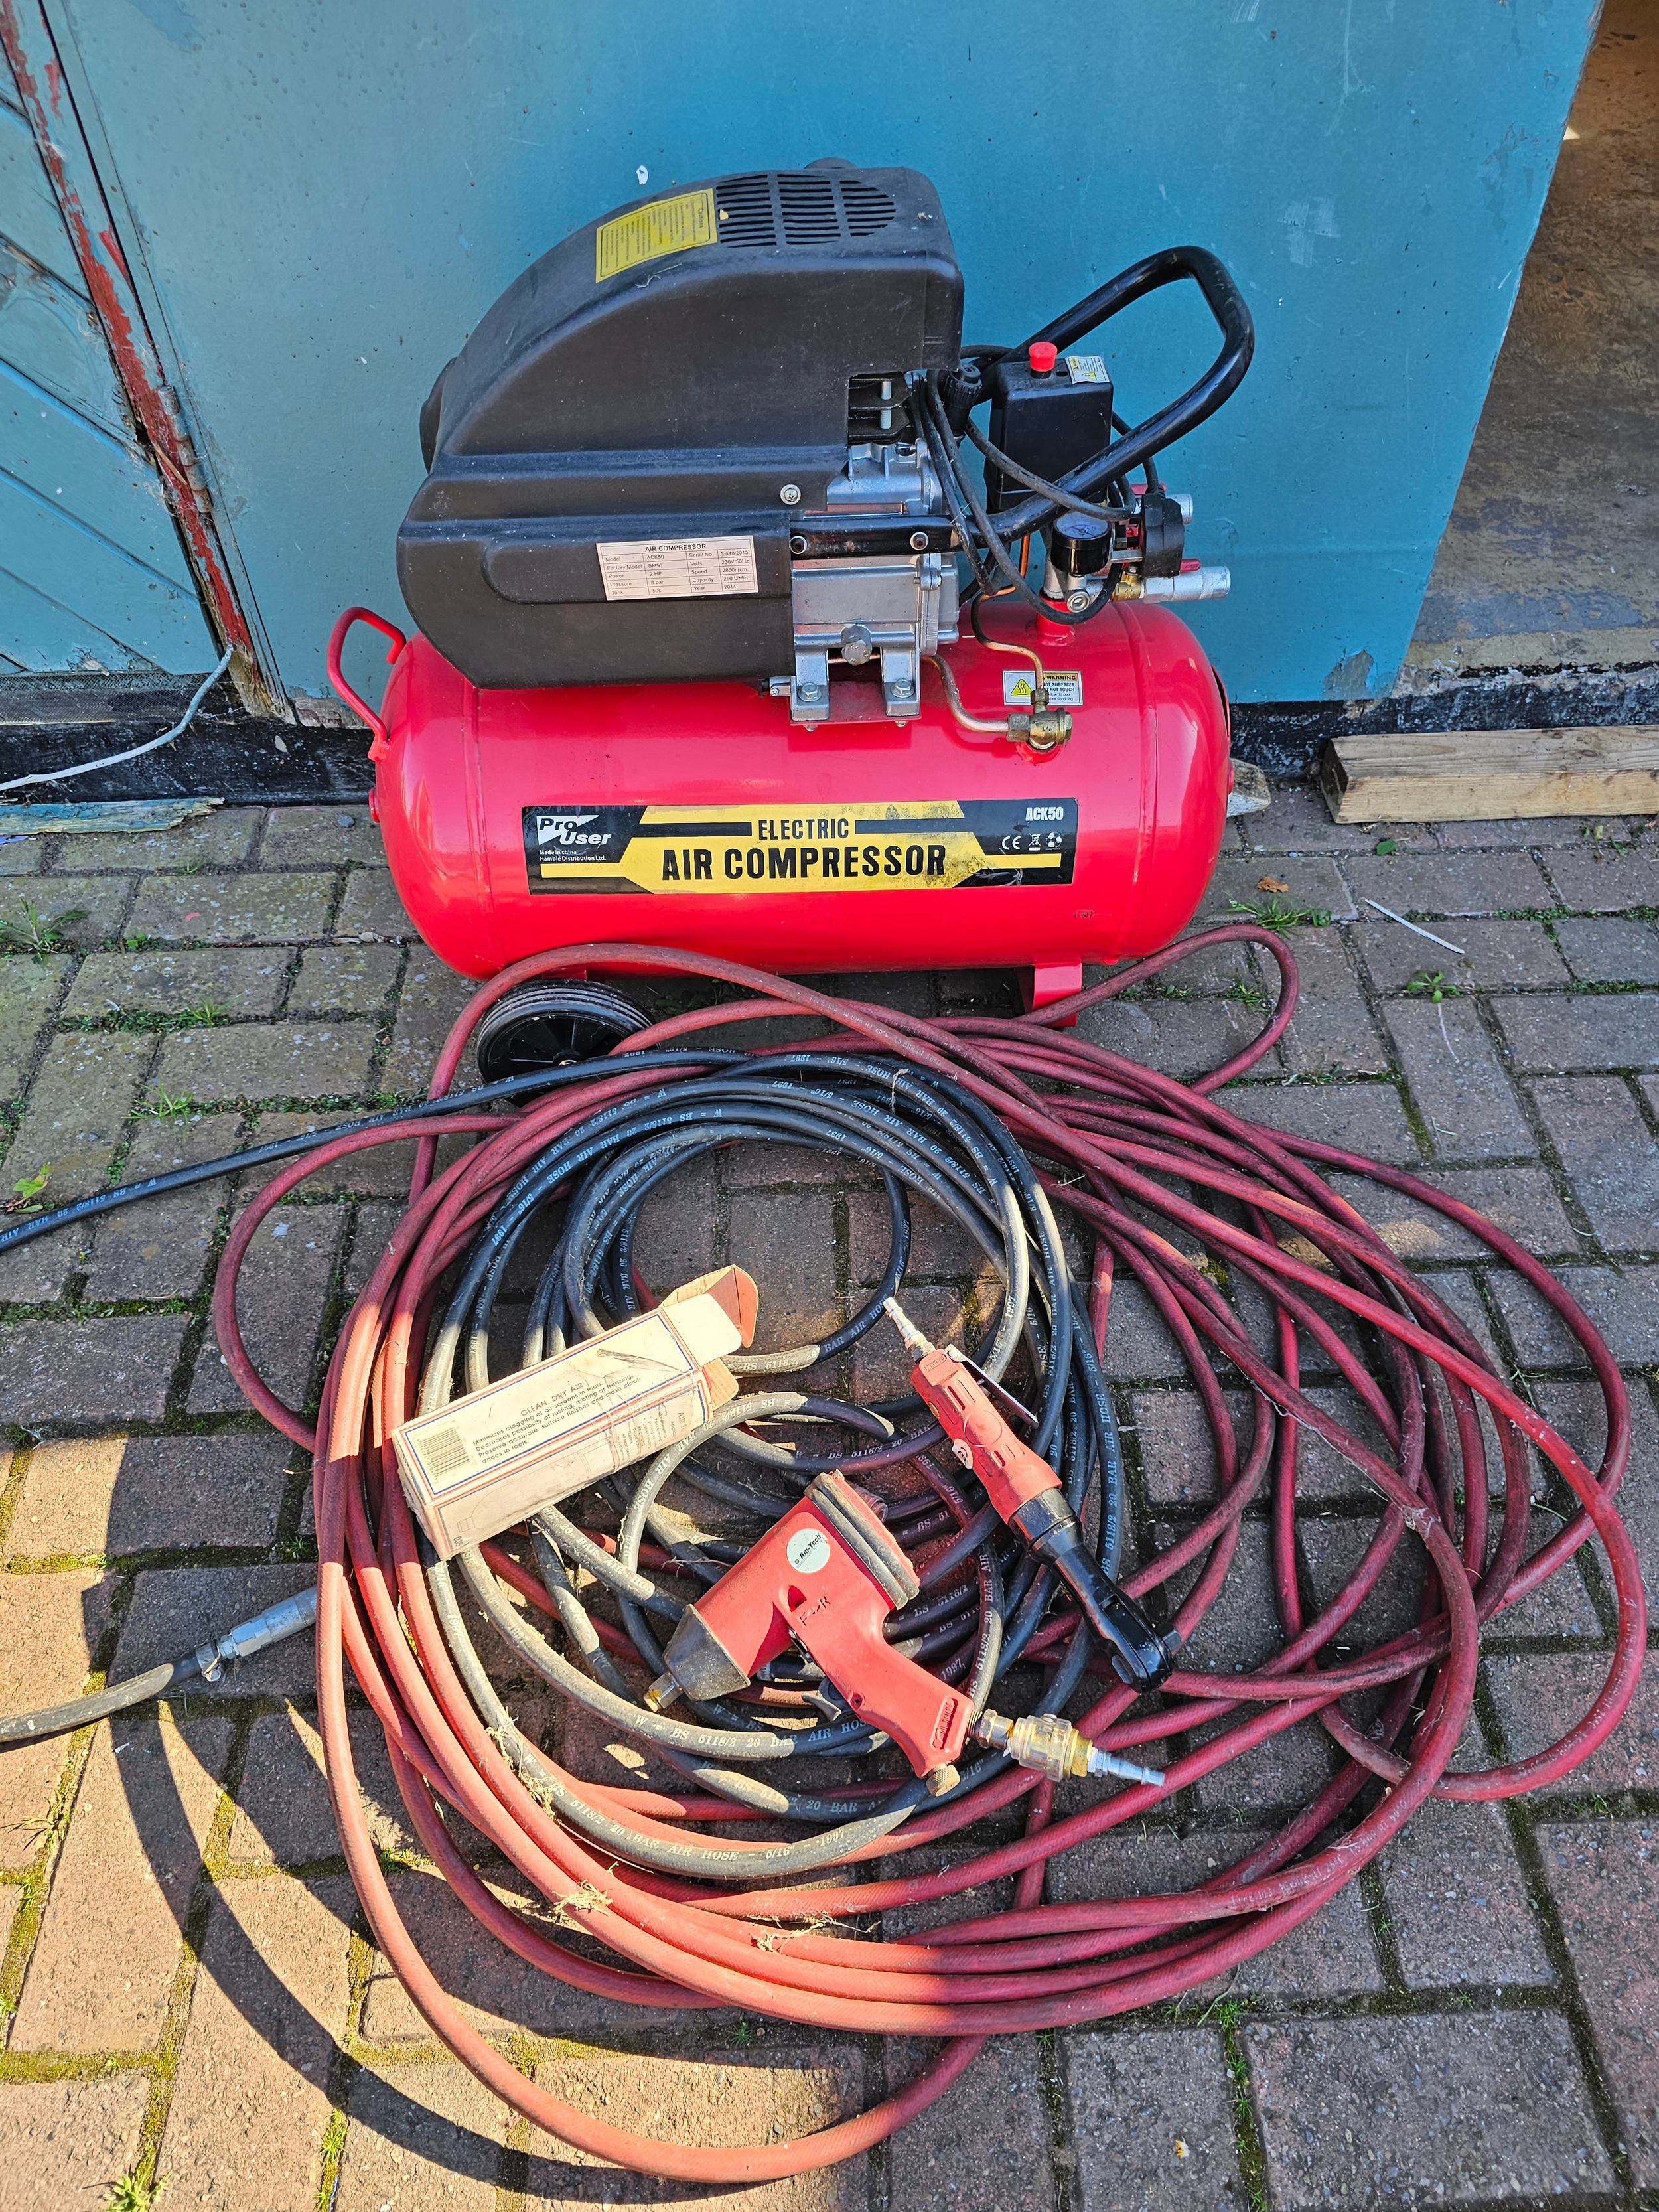 A Pro User 8 bar air compressor, model ACK50, 2hp, with air line and air tools